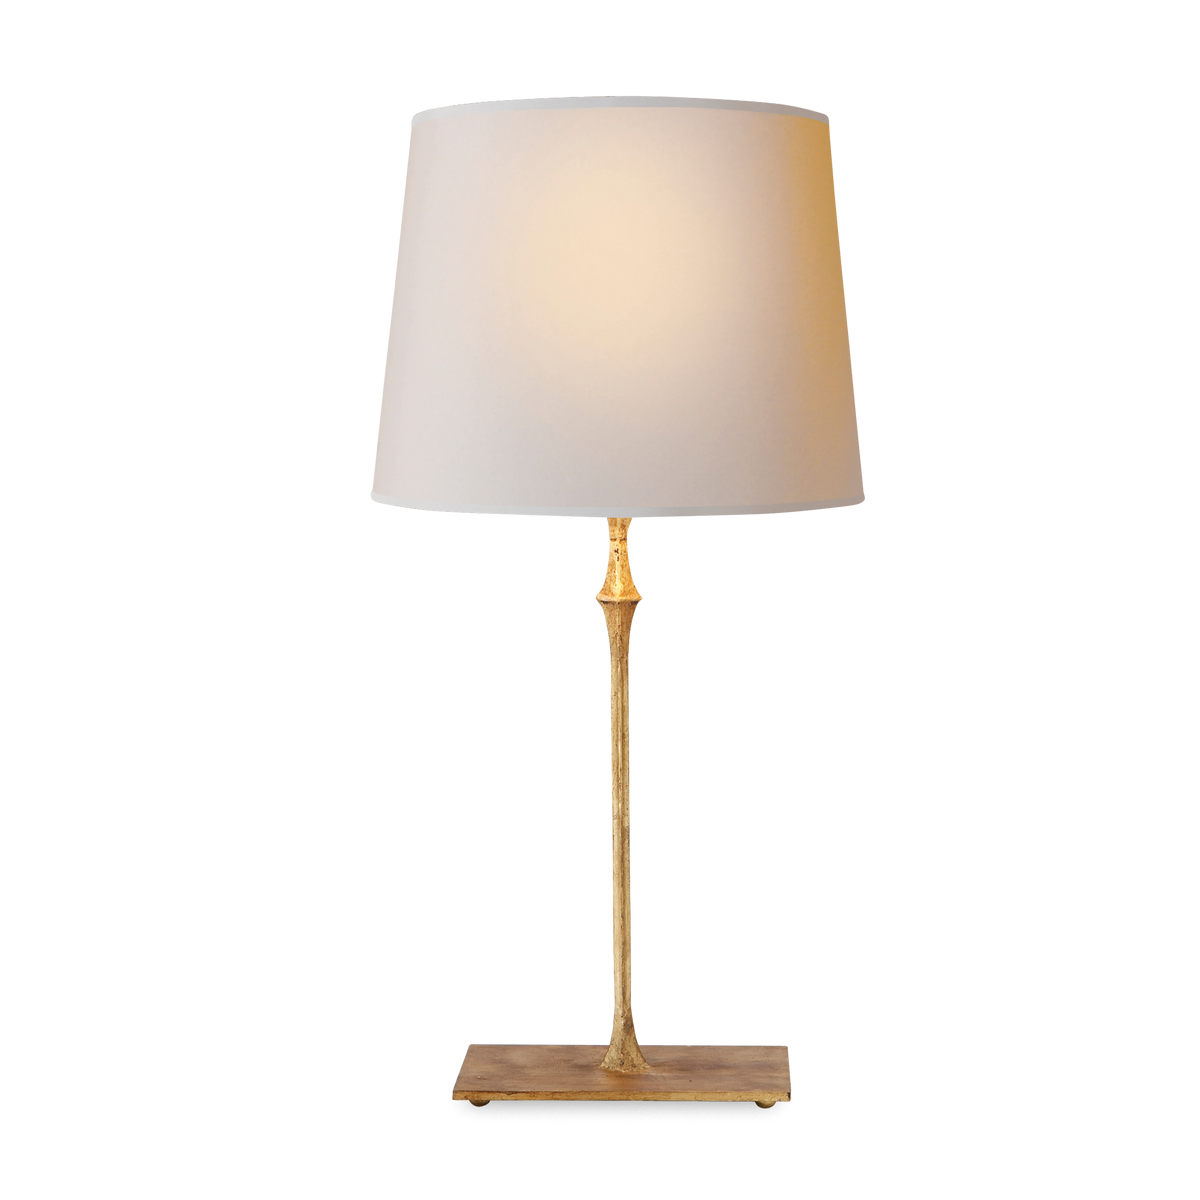 Dauphine Bedside Table Lamp